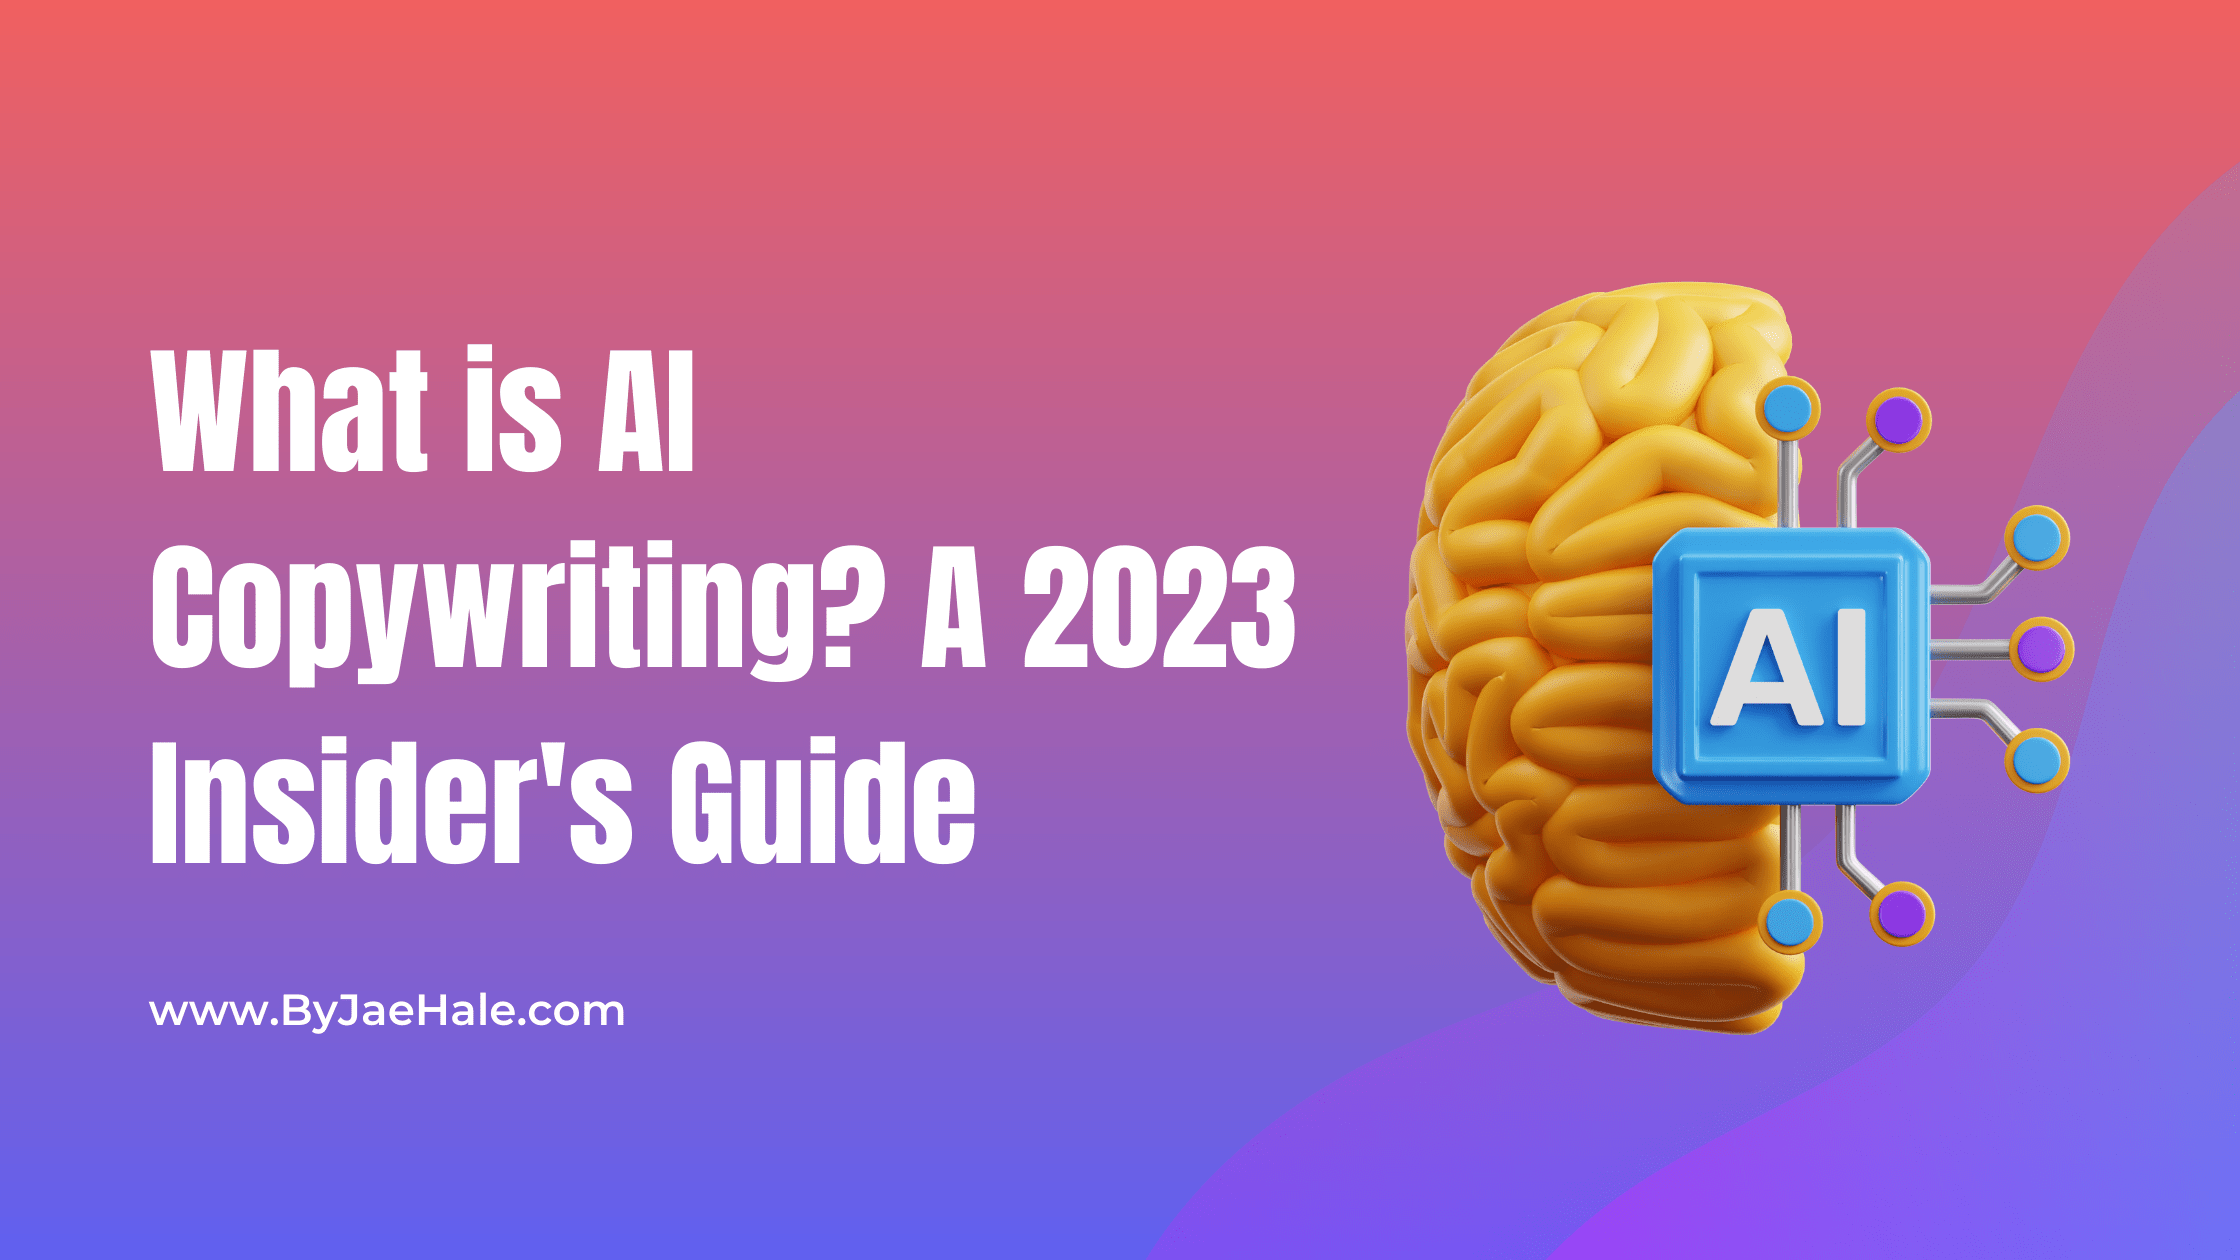 What is AI copywriting